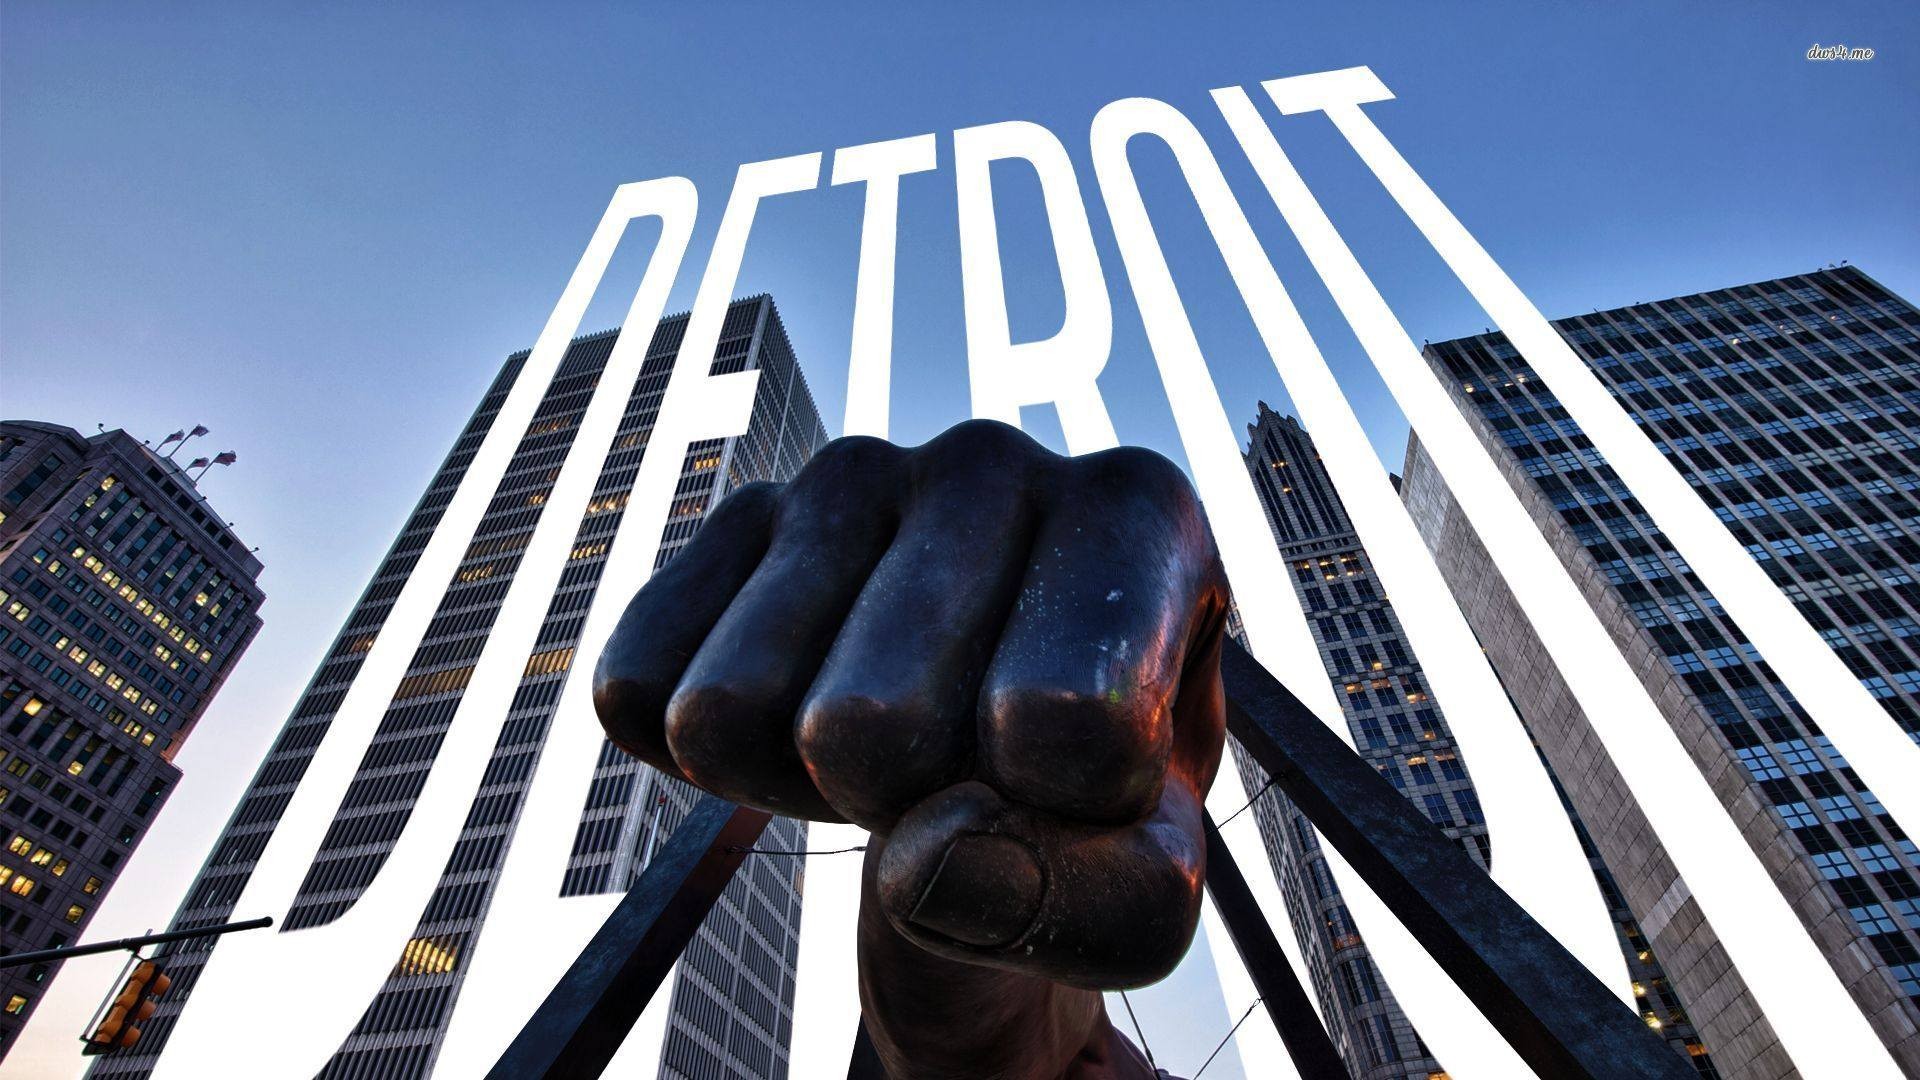 General 1920x1080 Detroit USA watermarked text